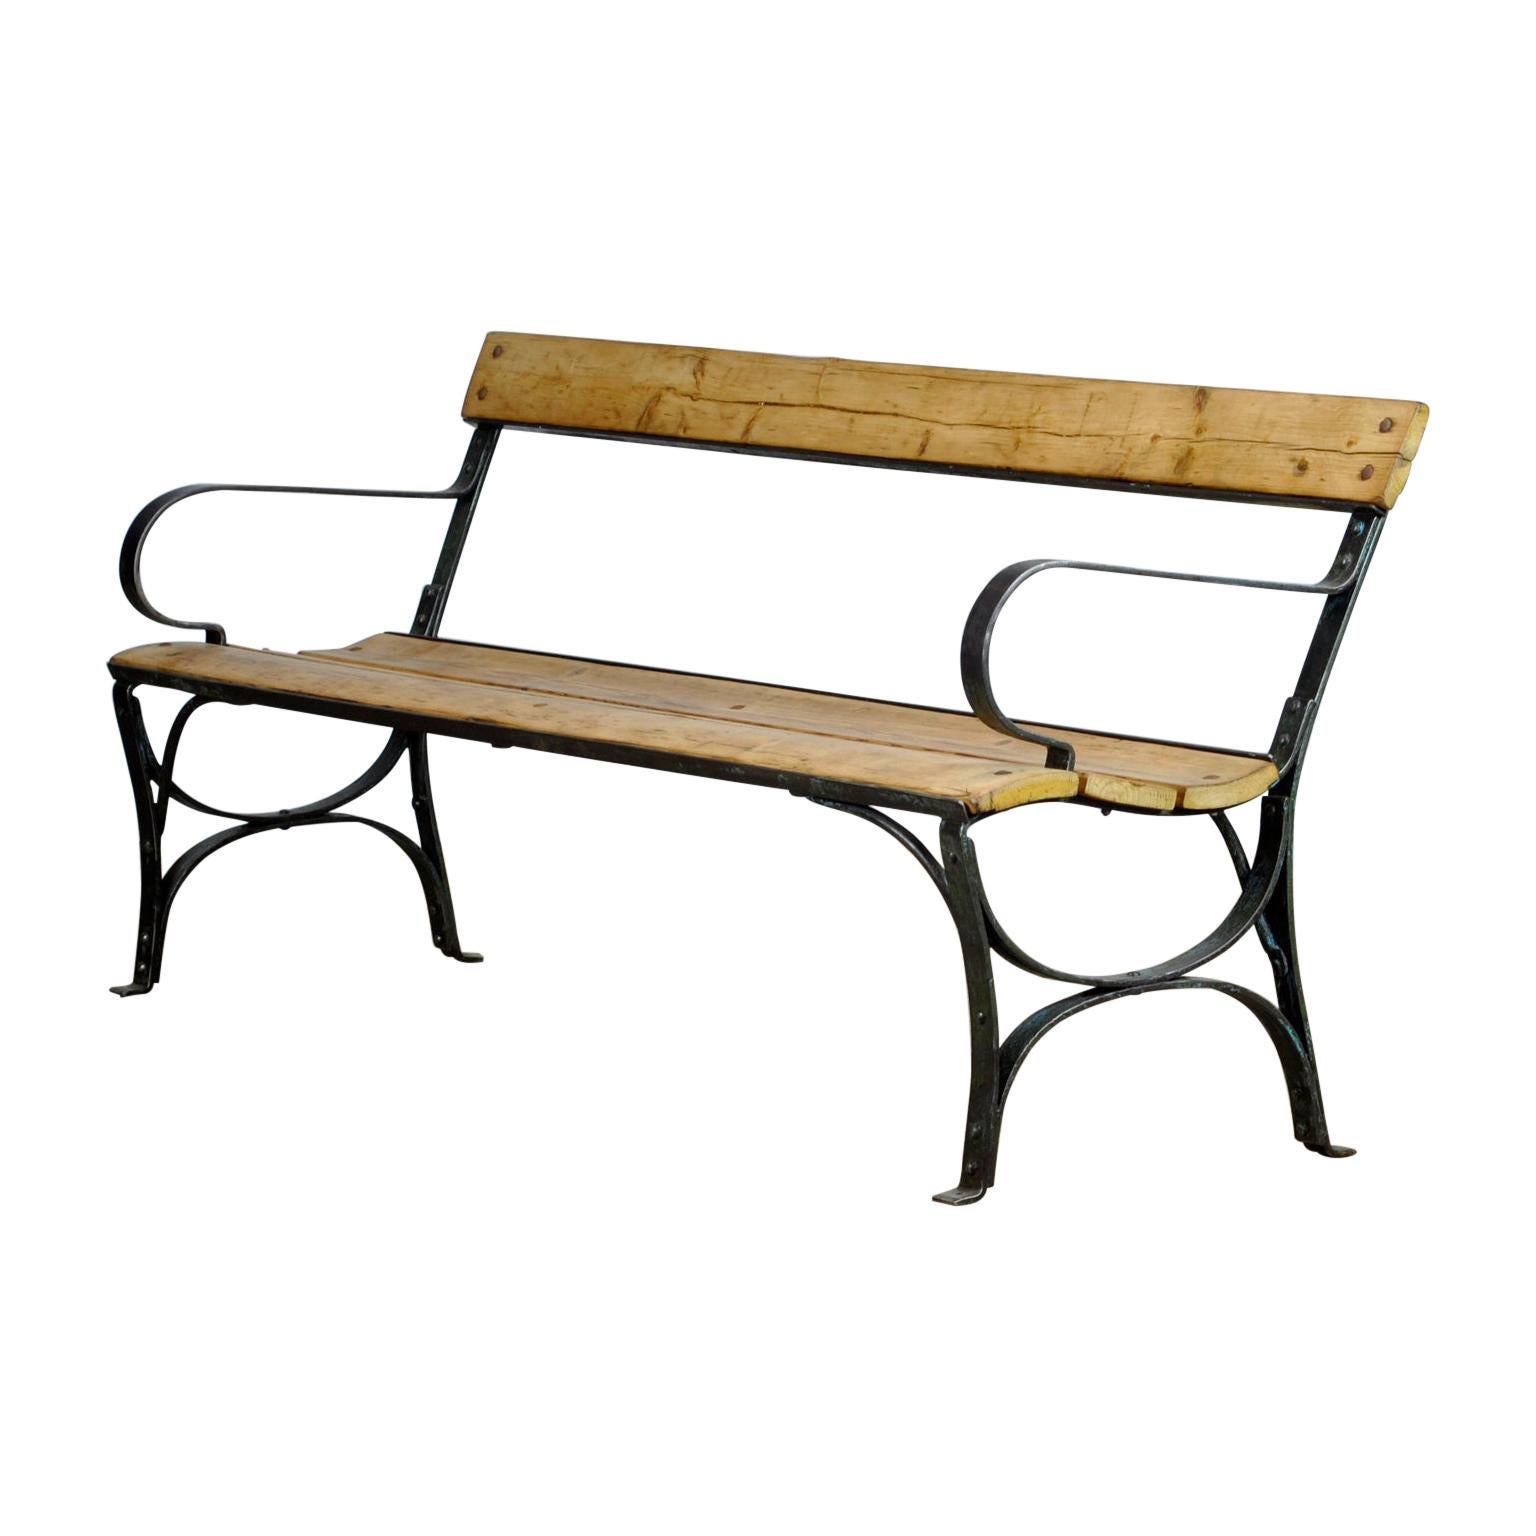 Riveted Iron Park Bench from the 1930s